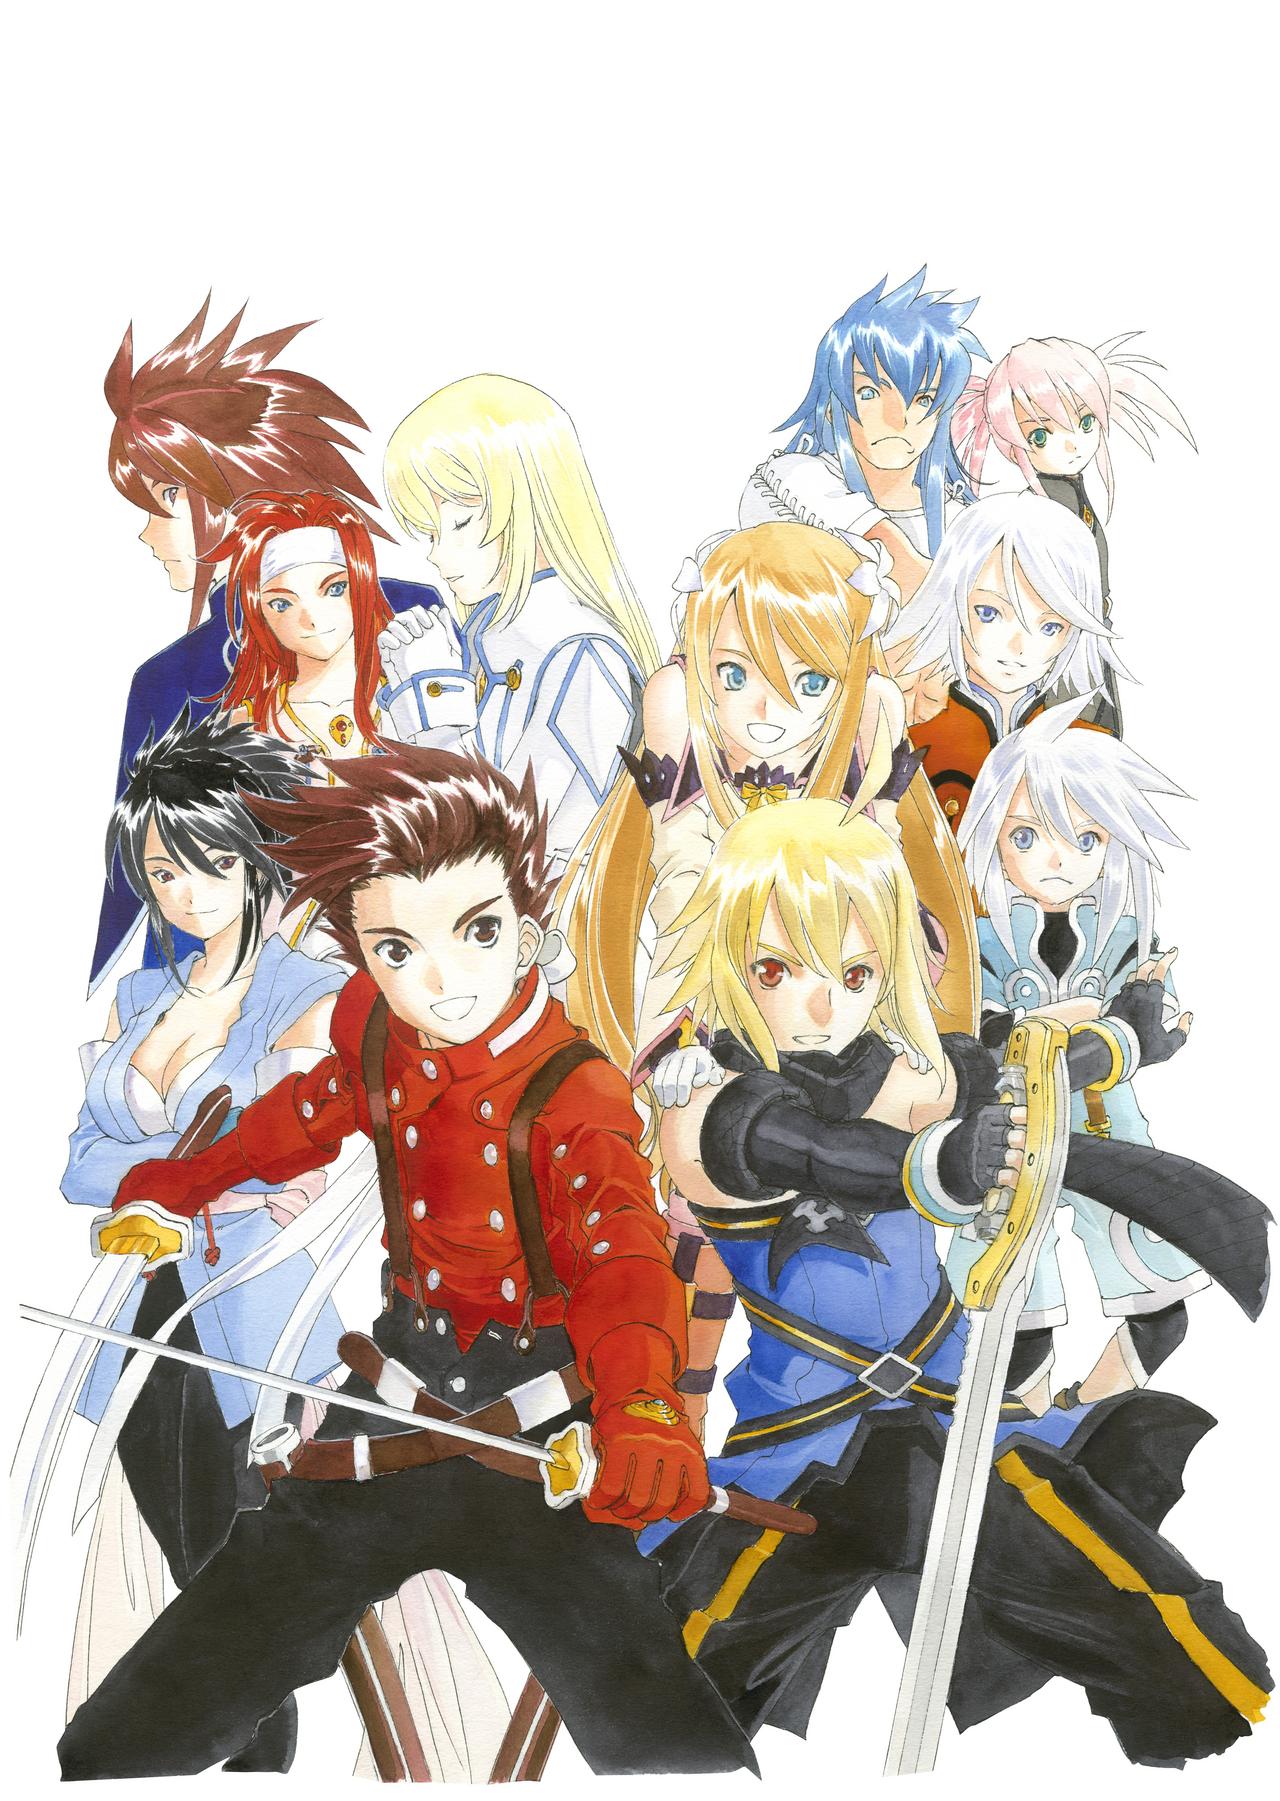 Artworks Tales of Symphonia Chronicles